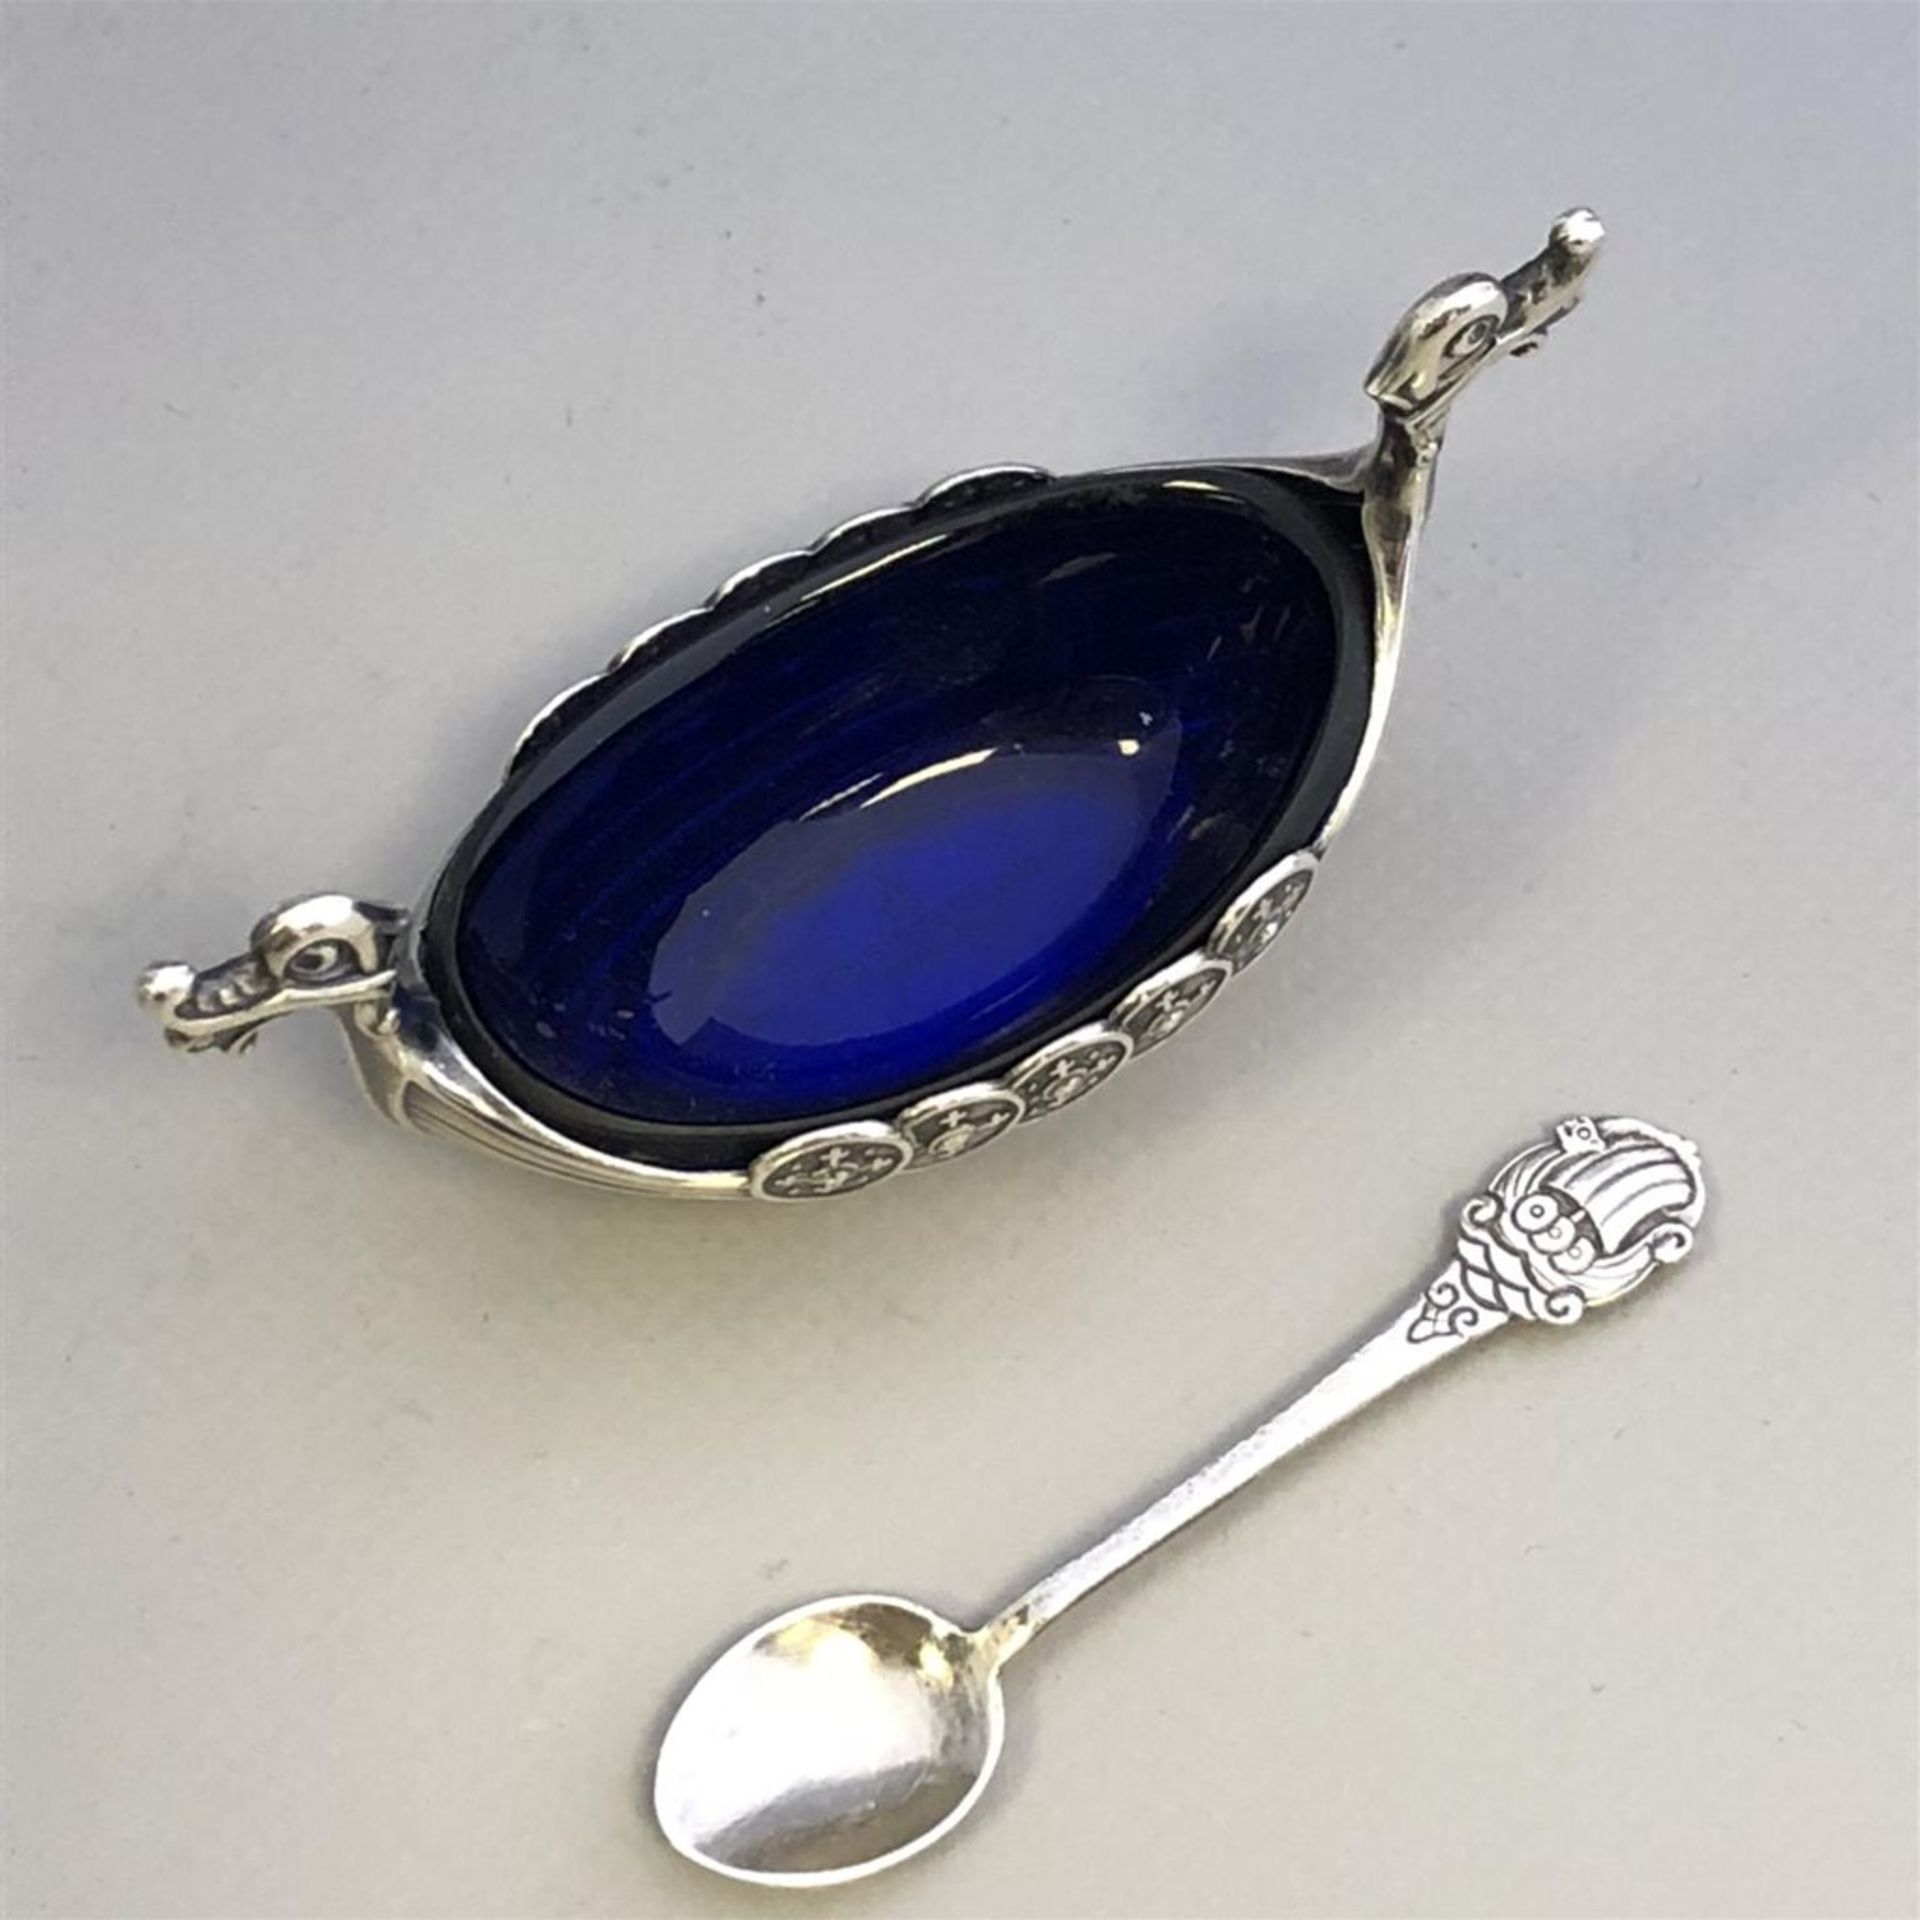 Silver and Blue Glass Viking Ship Salt with Spoon - 925S Sterling - Norway - Image 2 of 3